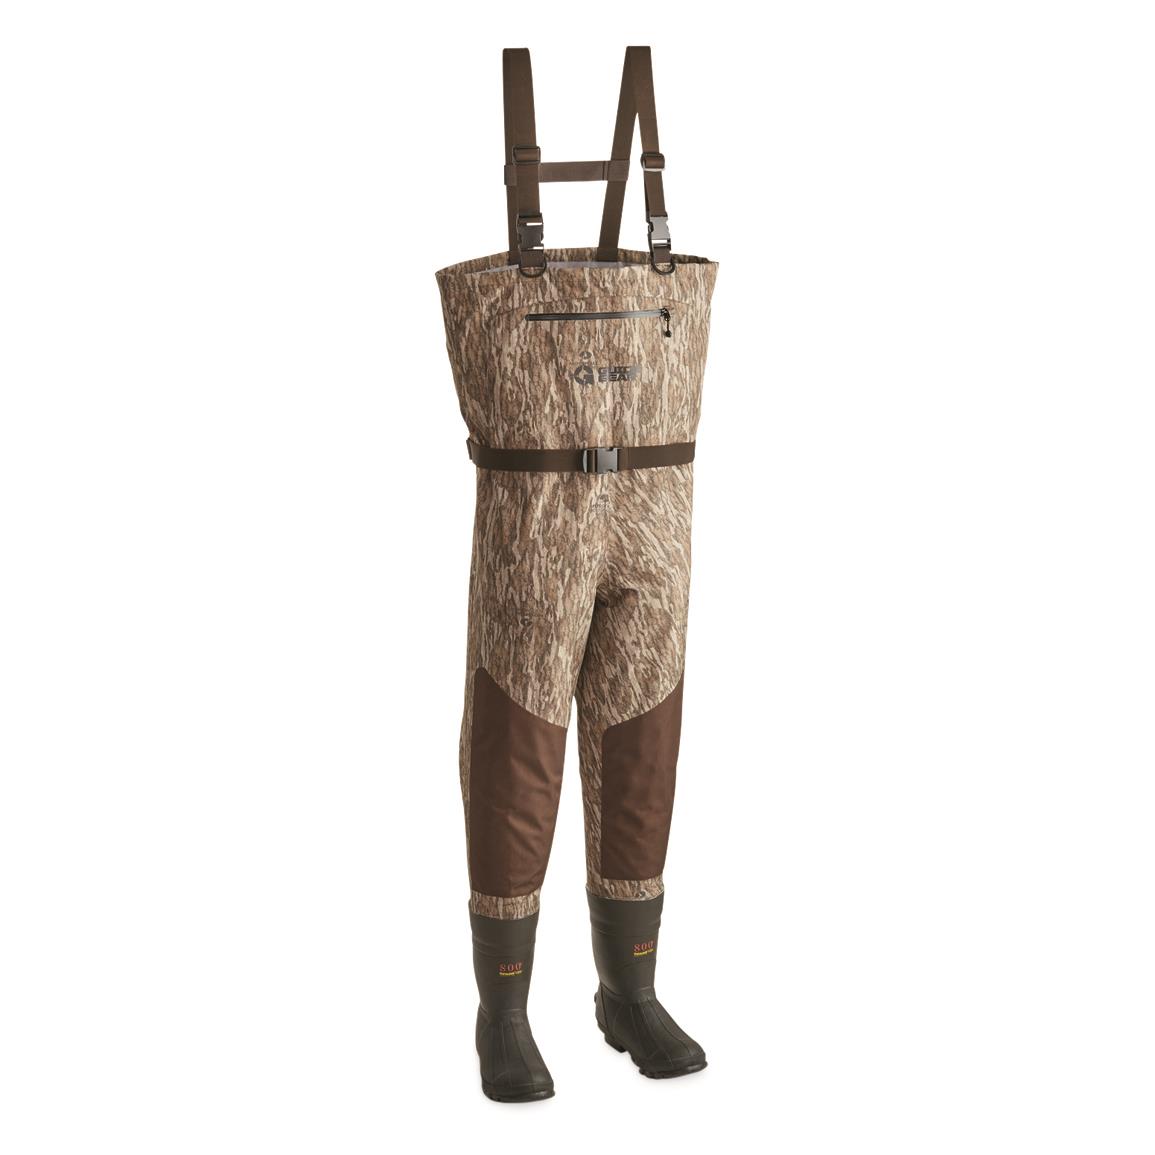 Guide Gear Men’s Breathable Bootfoot Chest Waders, 800-gram, Stout Sizes, Mossy Oak Bottomland®